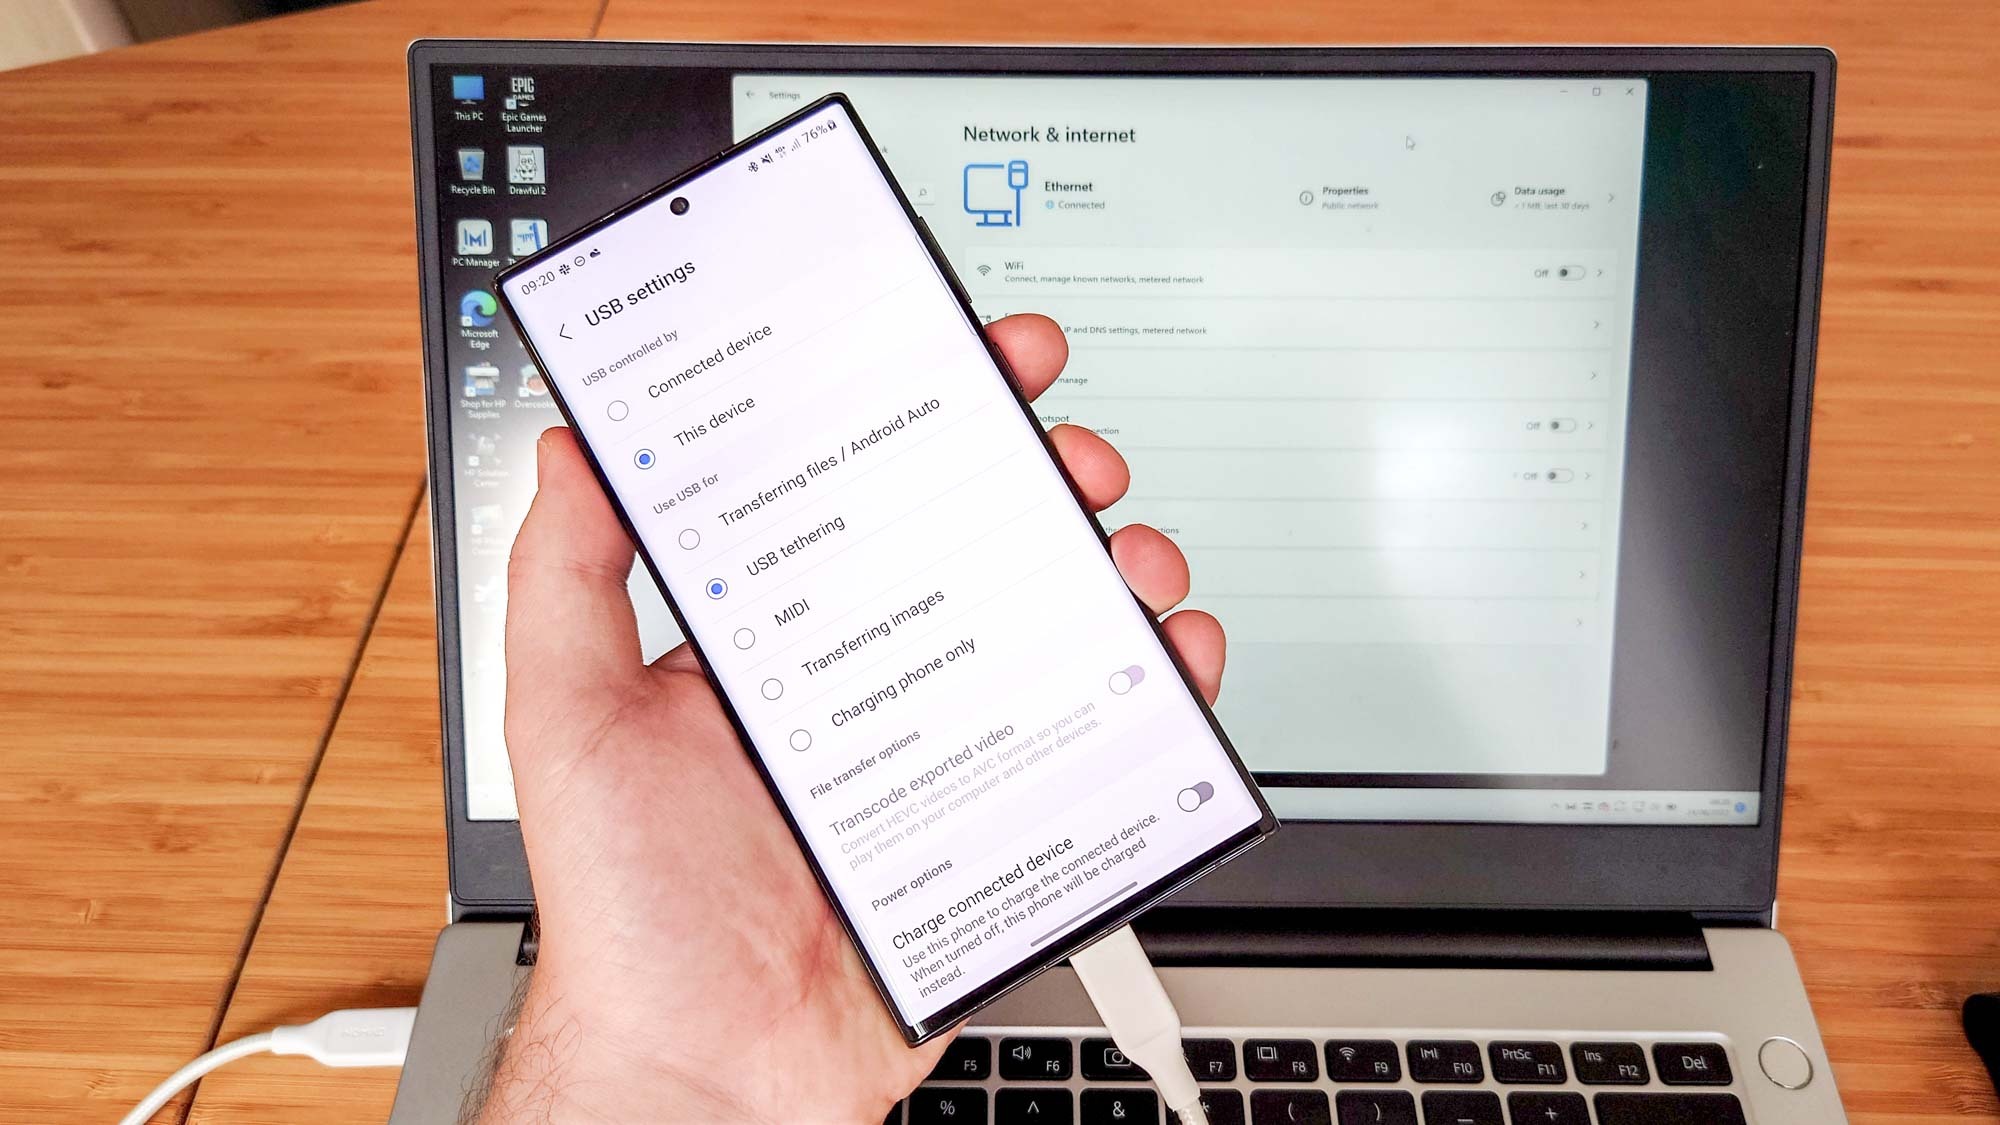 Skærm travl ballon How to share Wi-Fi on Android using USB tethering | Tom's Guide